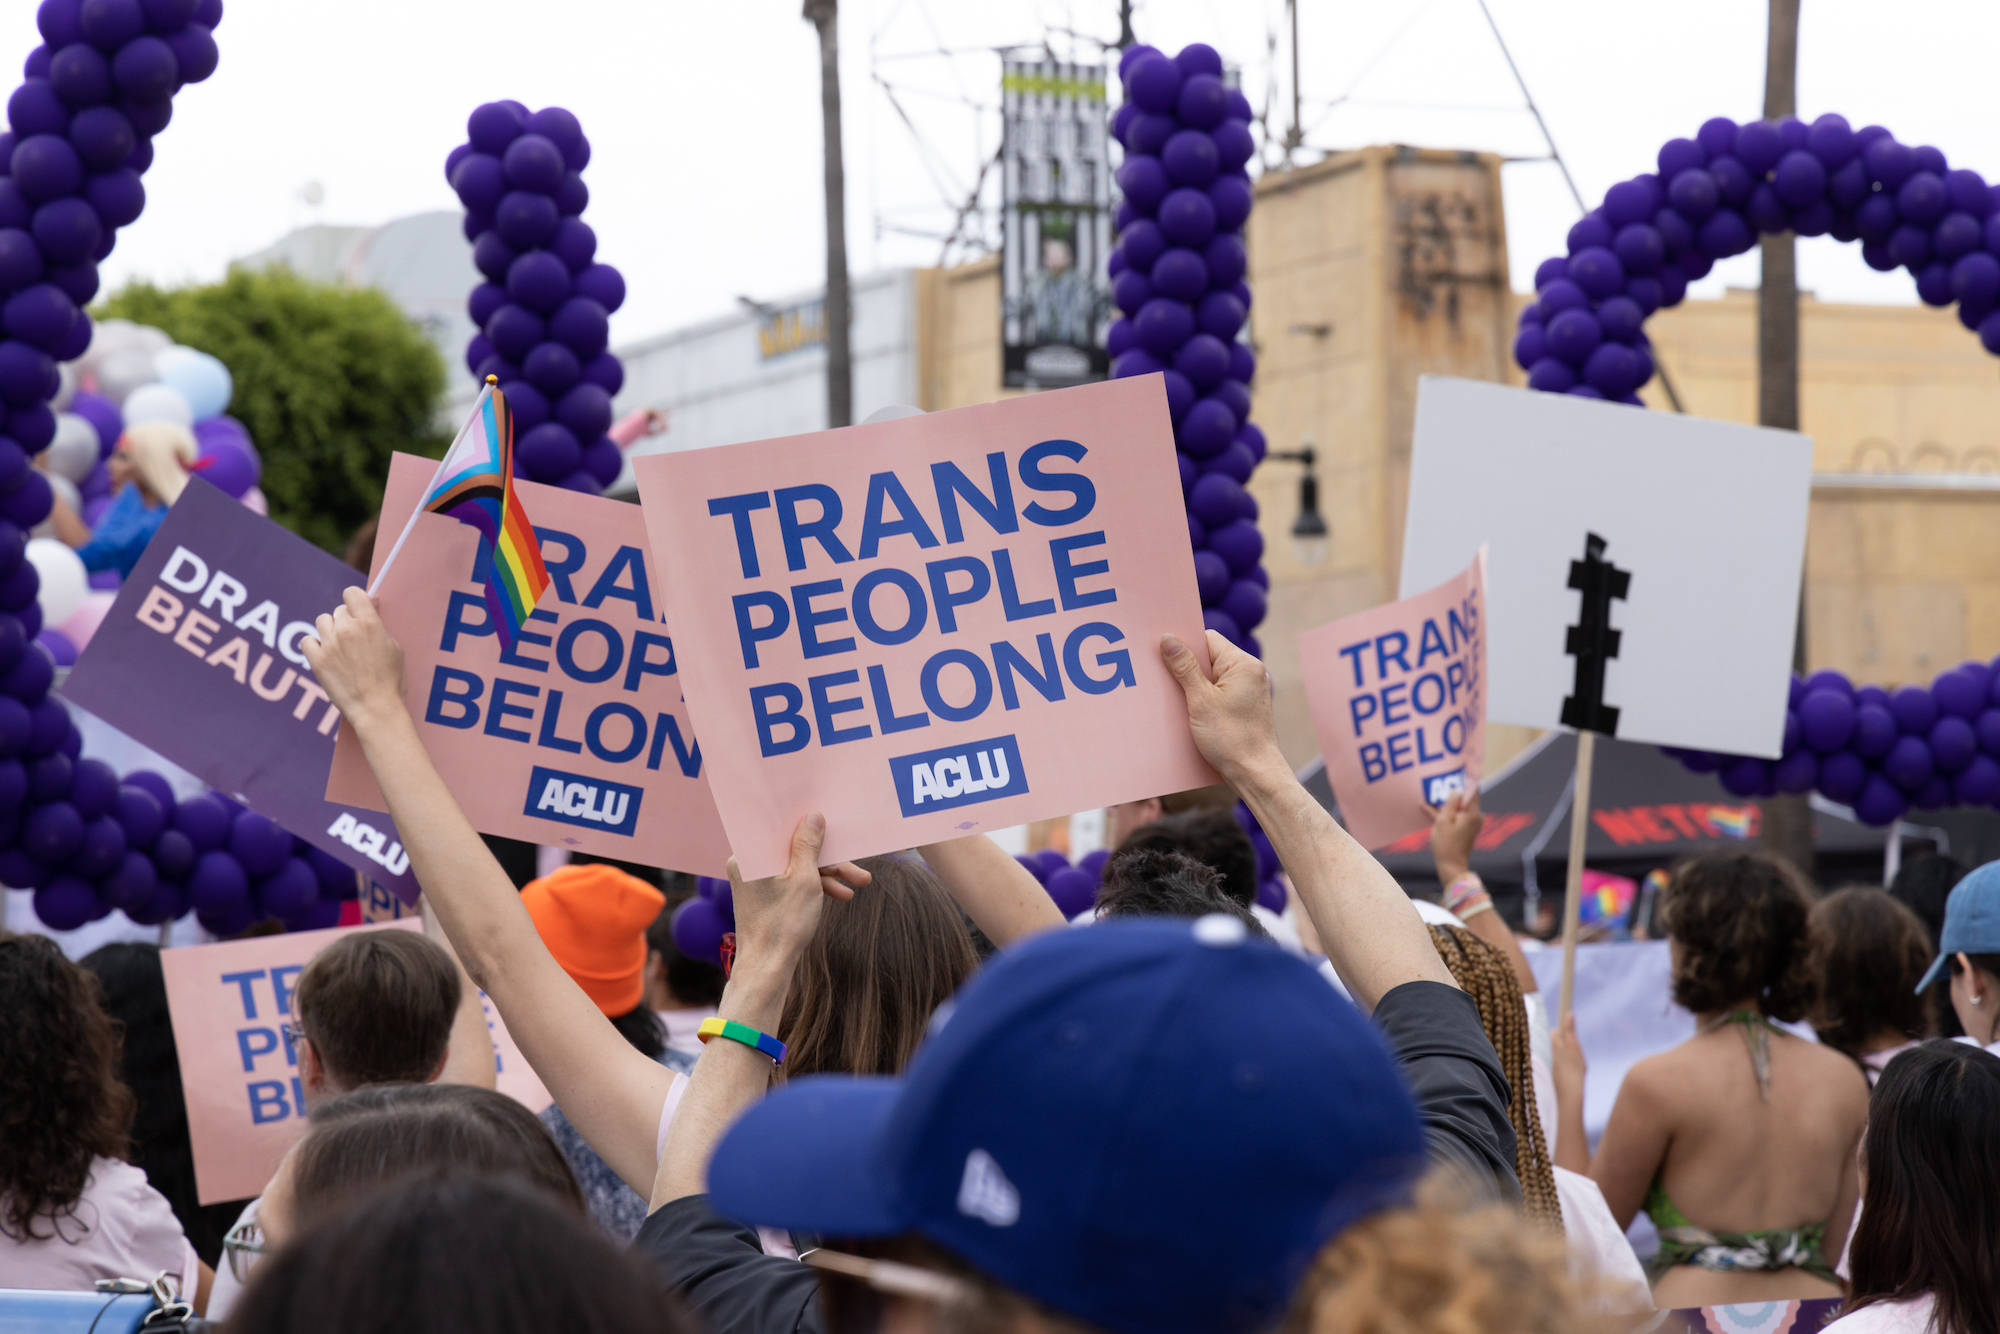 A group of individuals holding ACLU signs that says Trans People Belong.